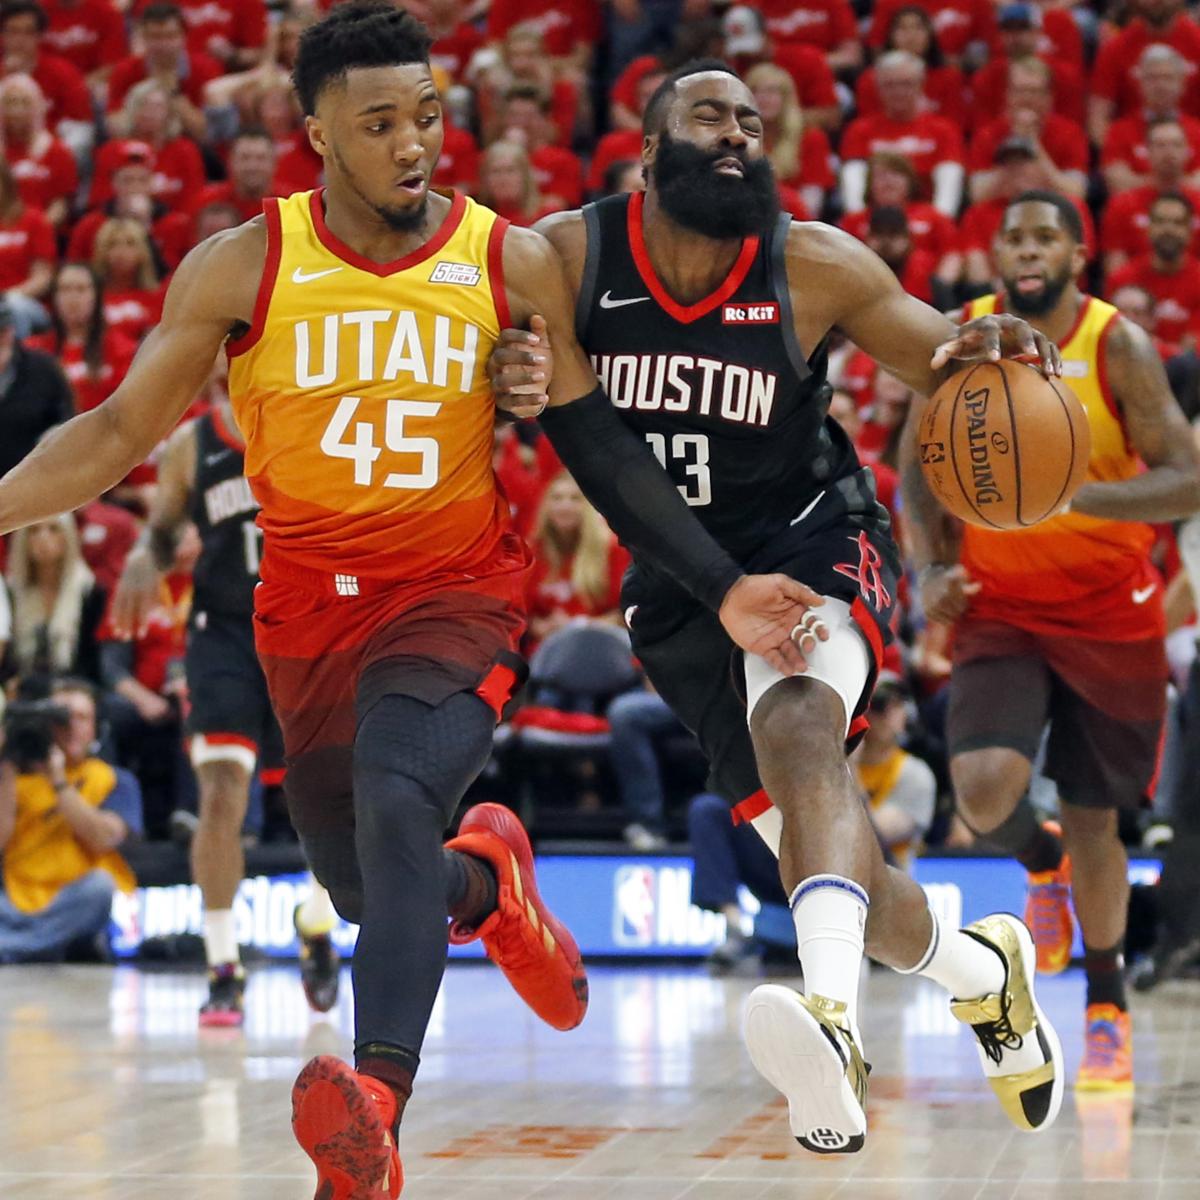 NBA Playoffs 2019: Updated Championship Odds, Bracket Picture and